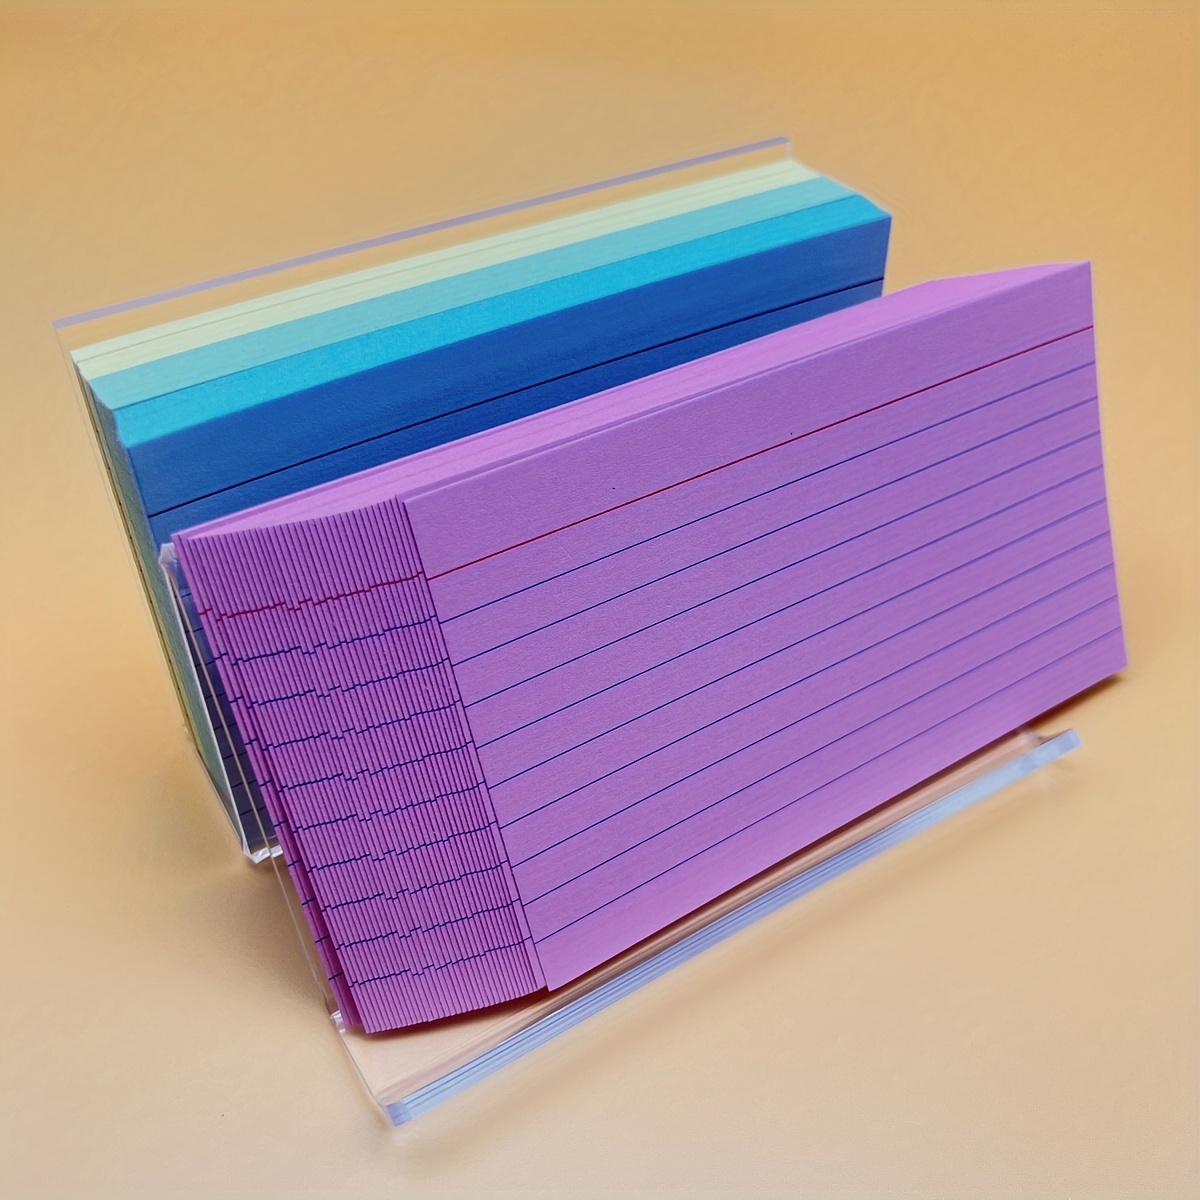 3x5 Index Card Holder With 5 Dividers, Labels (3 Colors, 3 Pack)